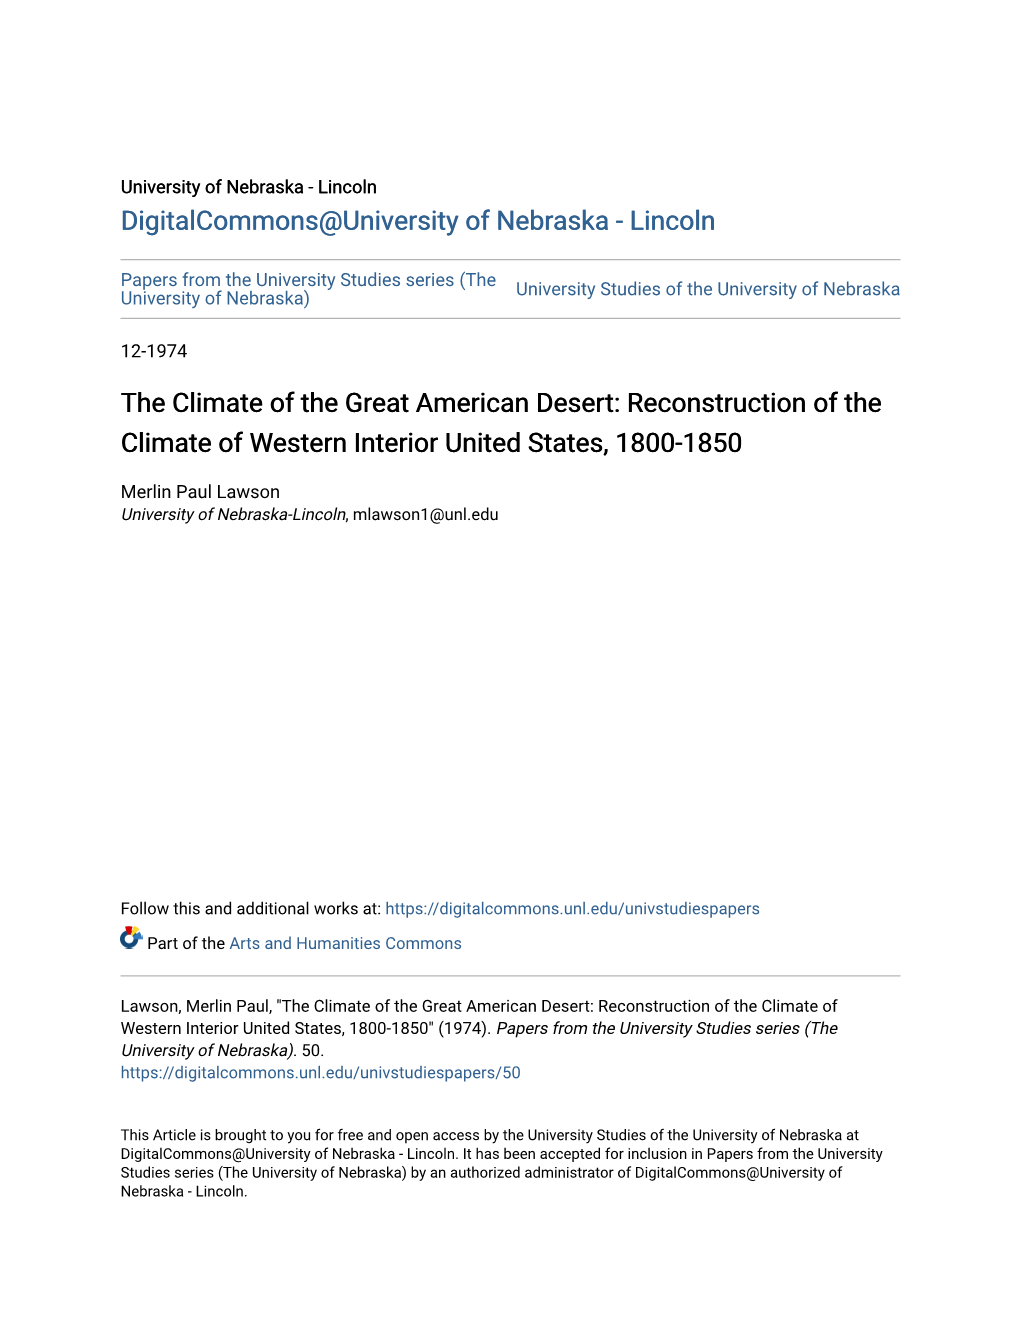 The Climate of the Great American Desert: Reconstruction of the Climate of Western Interior United States, 1800-1850